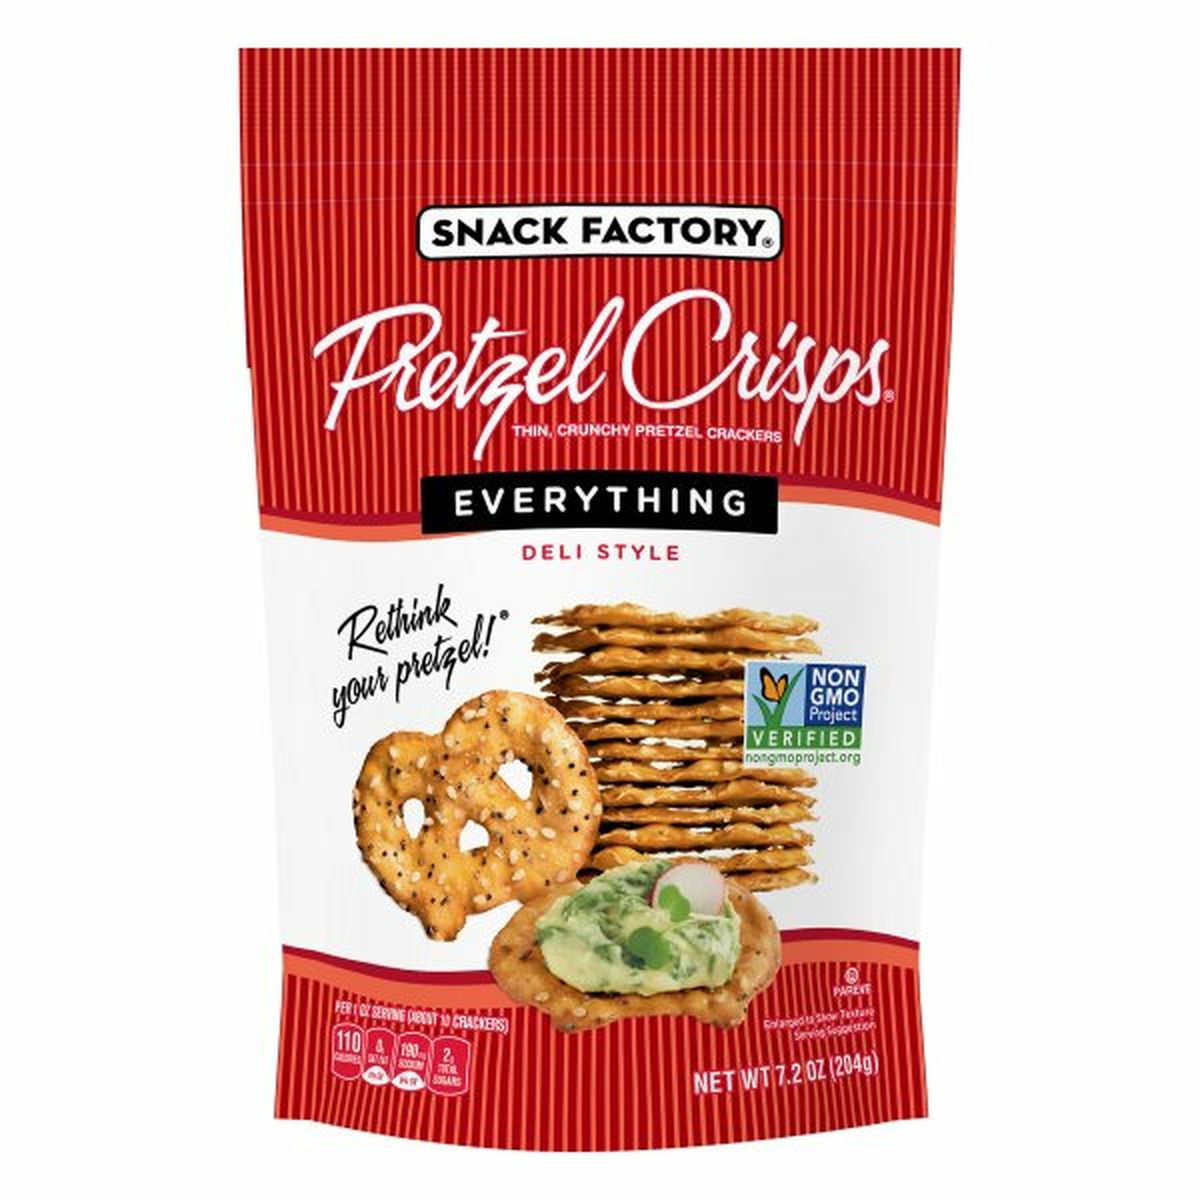 Calories in Snack Factorys Pretzel Crackers, Everything, Deli Style